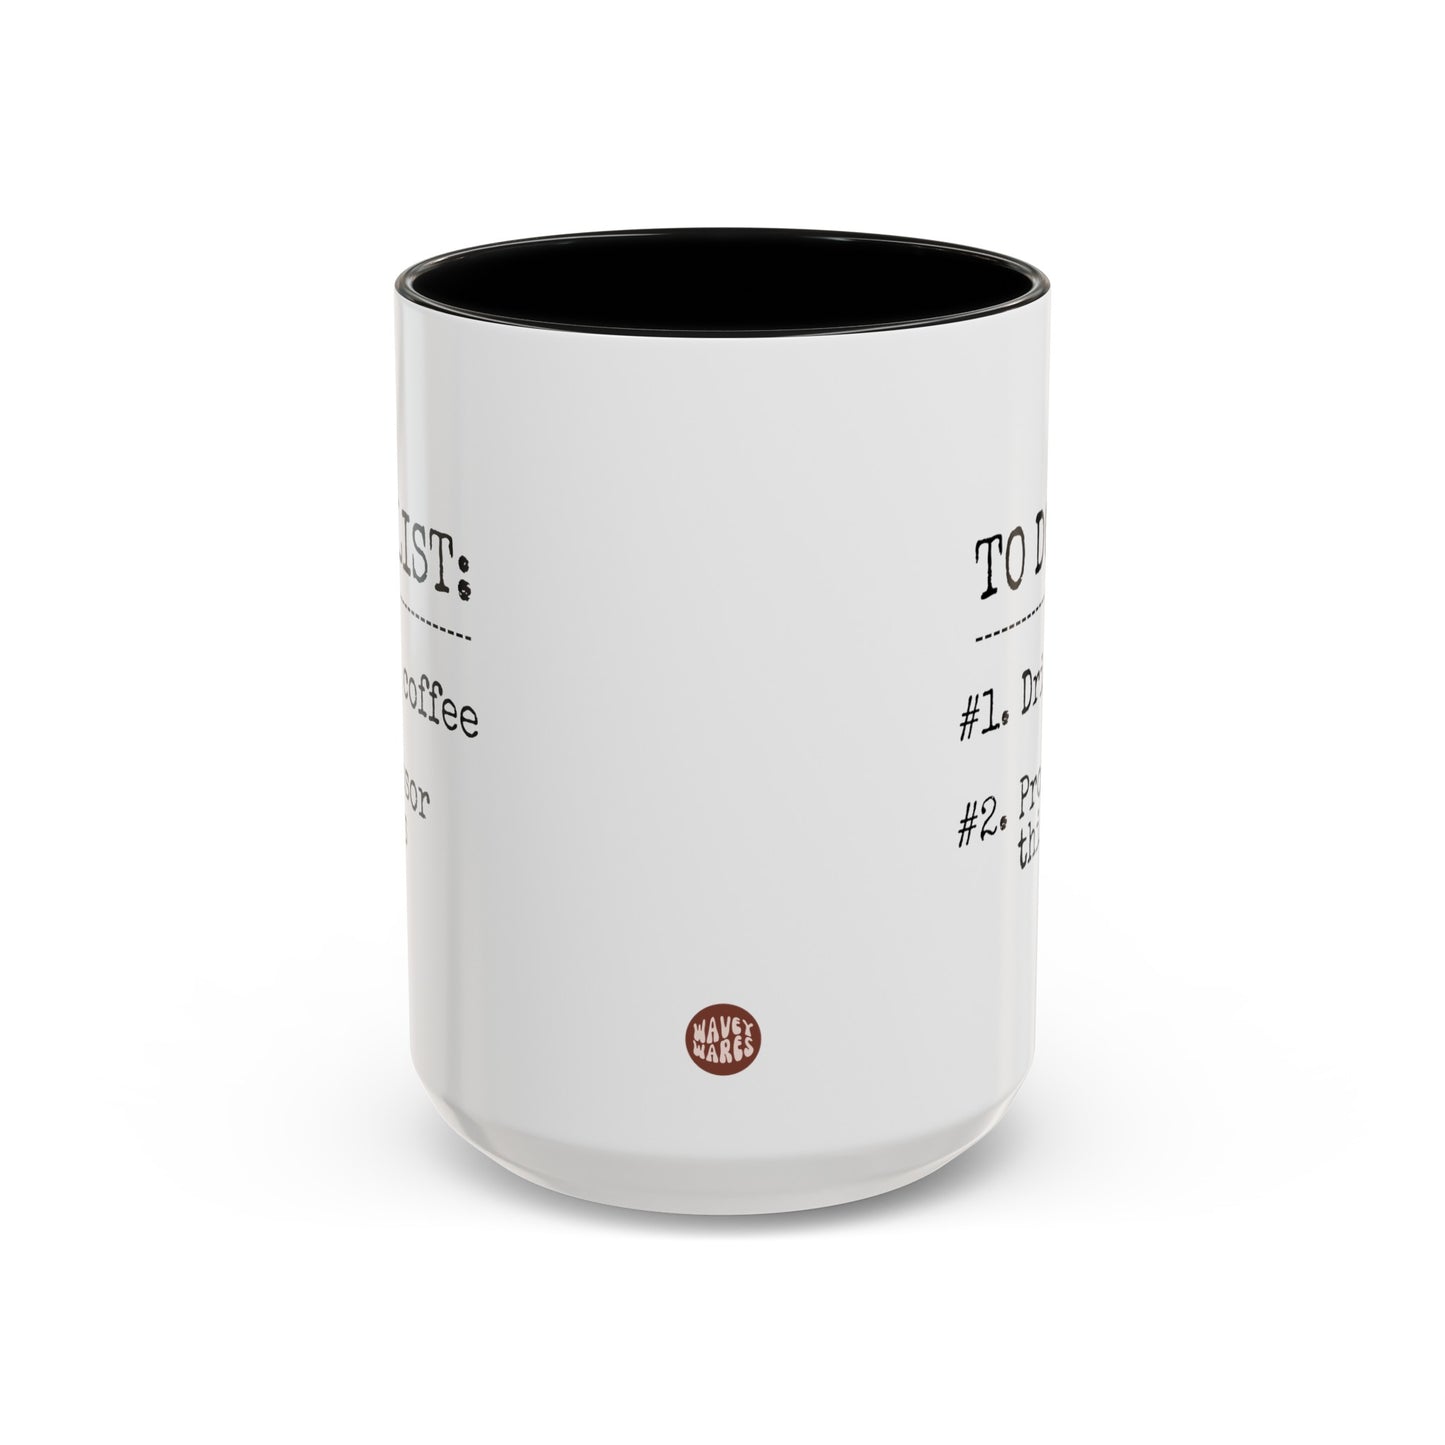 To Do List Drink Coffee Professor Things 15oz white with black accent funny large coffee mug gift for best college teacher instructor educator waveywares wavey wares wavywares wavy wares side